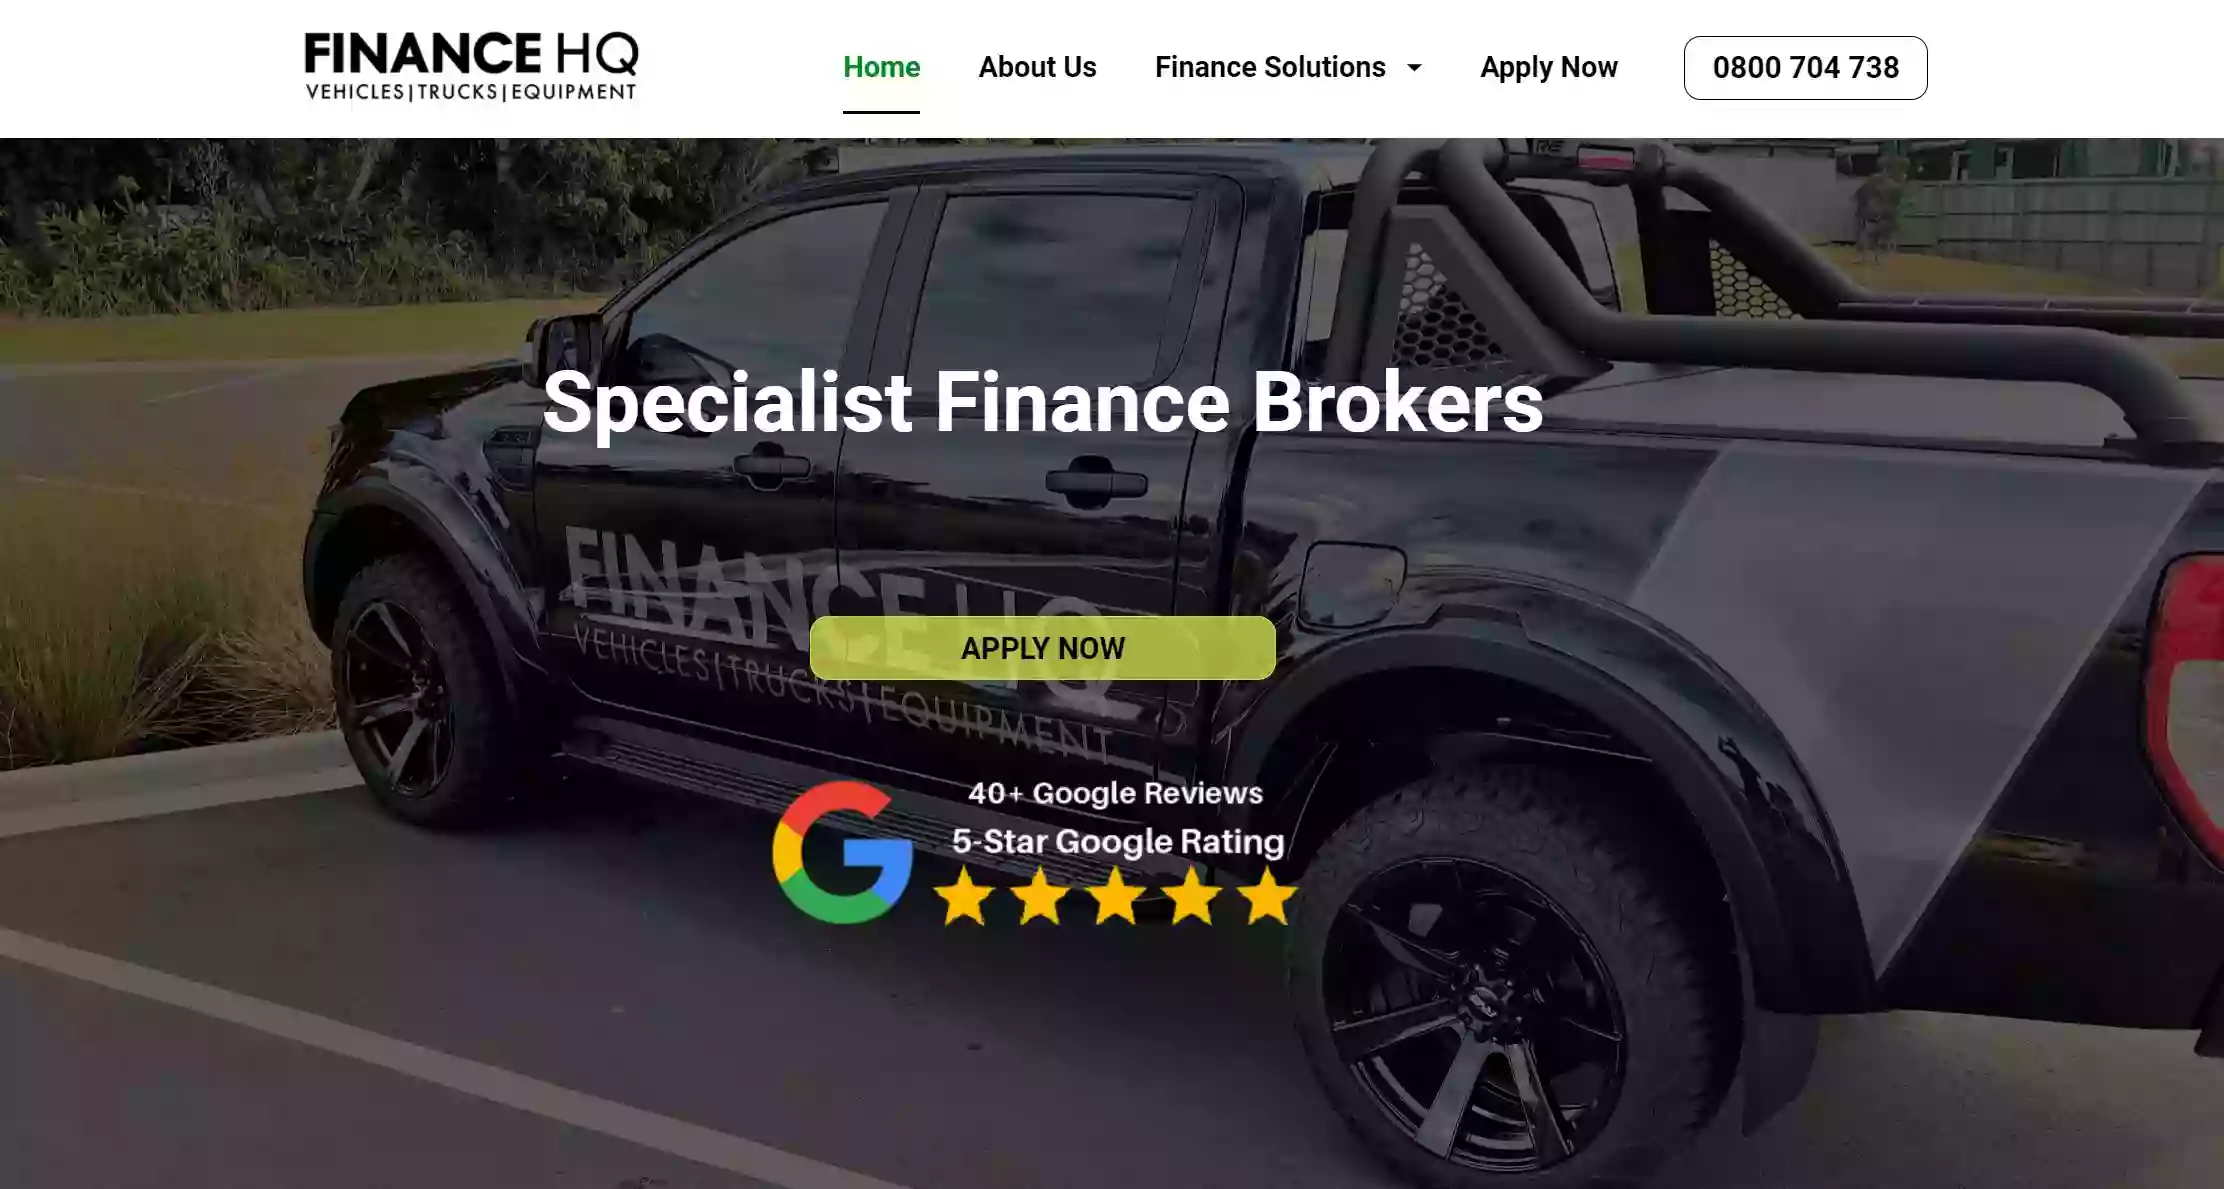 Finance HQ - Asset Finance for Truck, Vehicles and Equipment